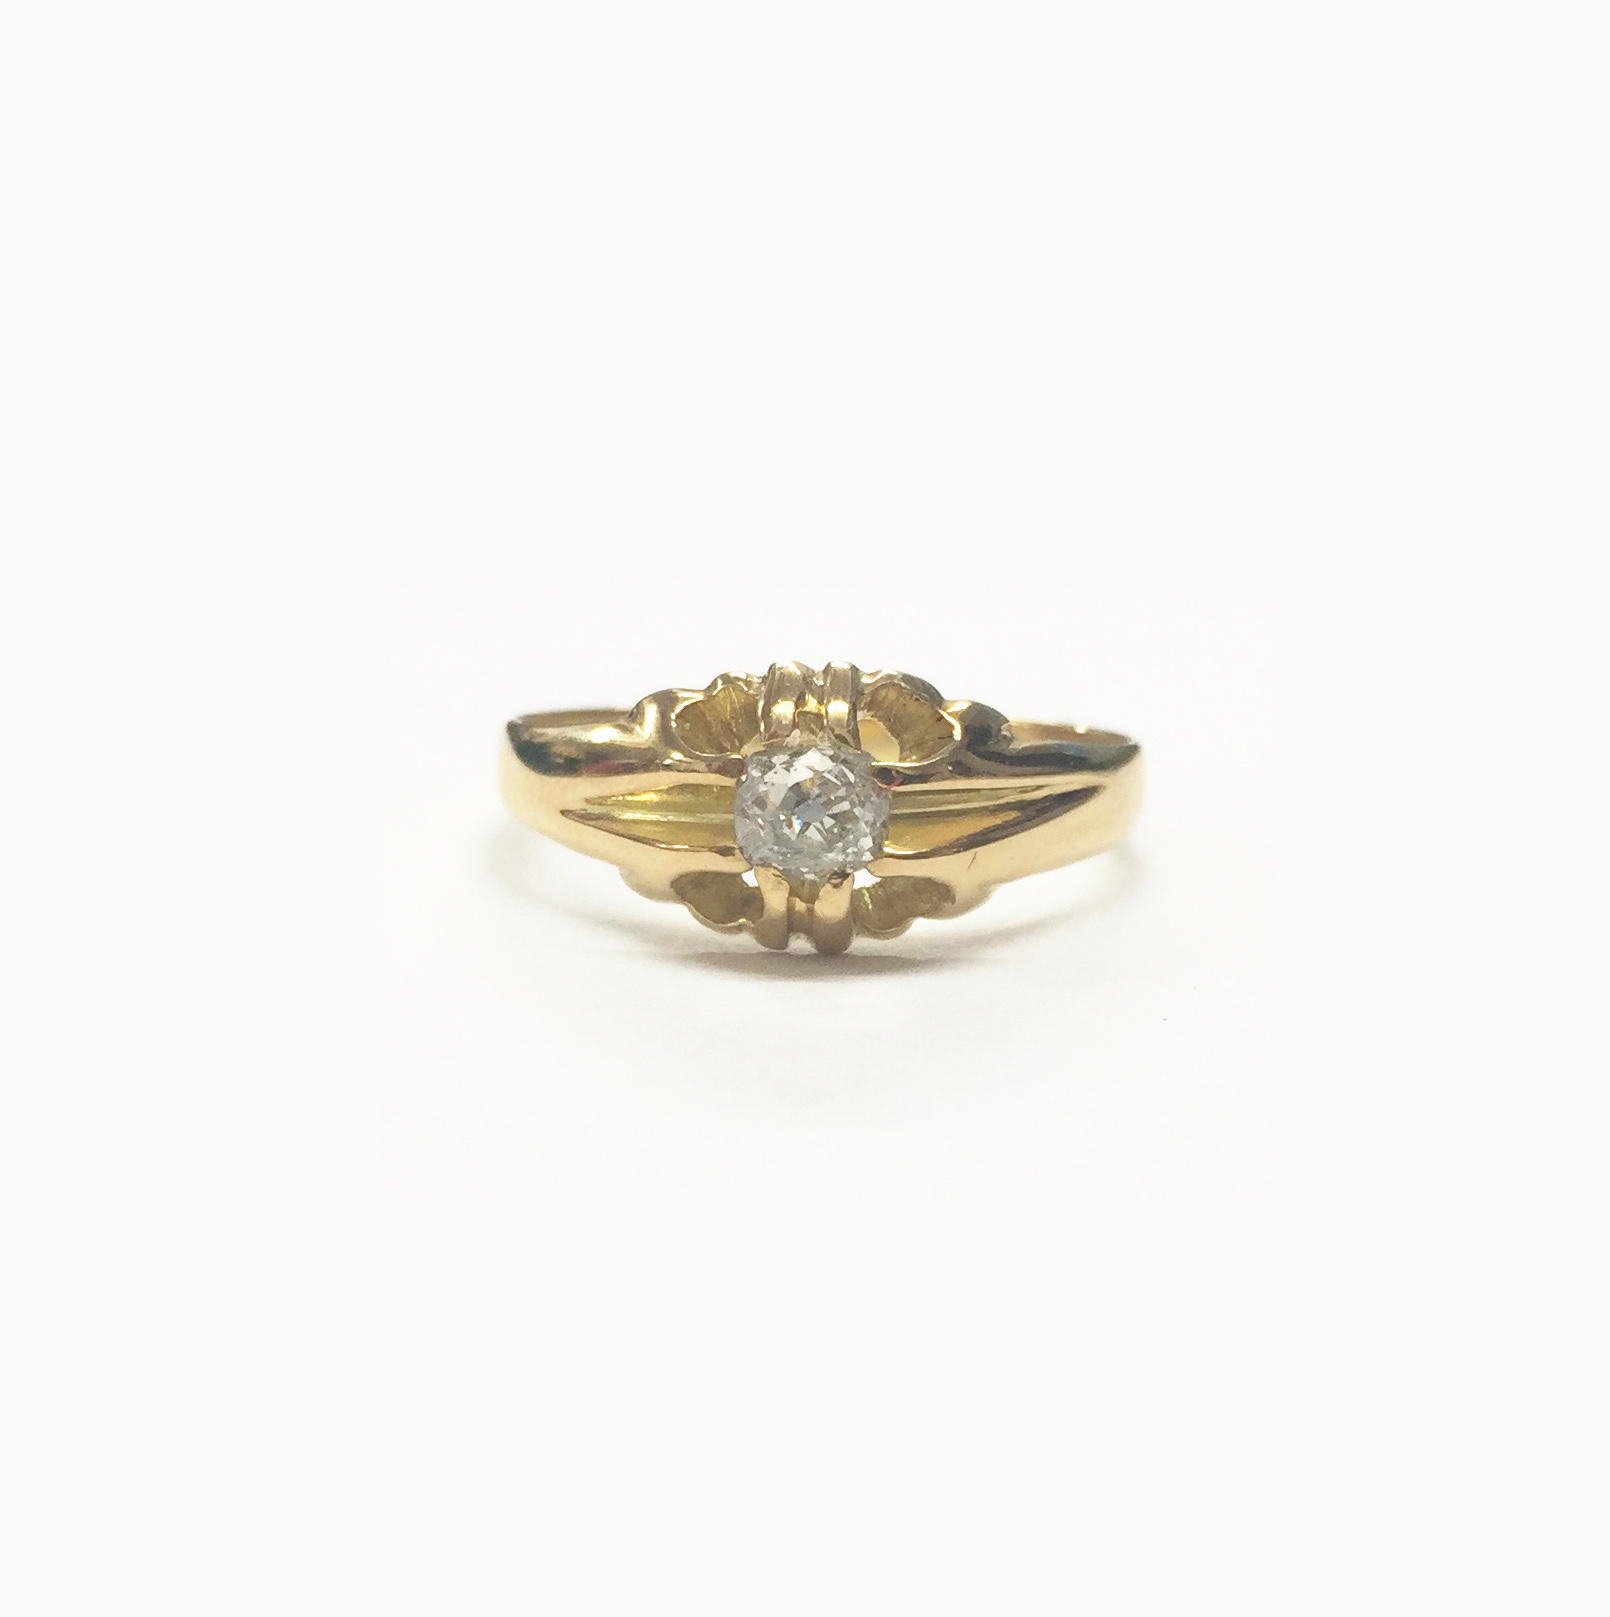 A Victorian Gypsy Set Diamond Ring with 18ct Yellow Gold Shank. - Image 4 of 4